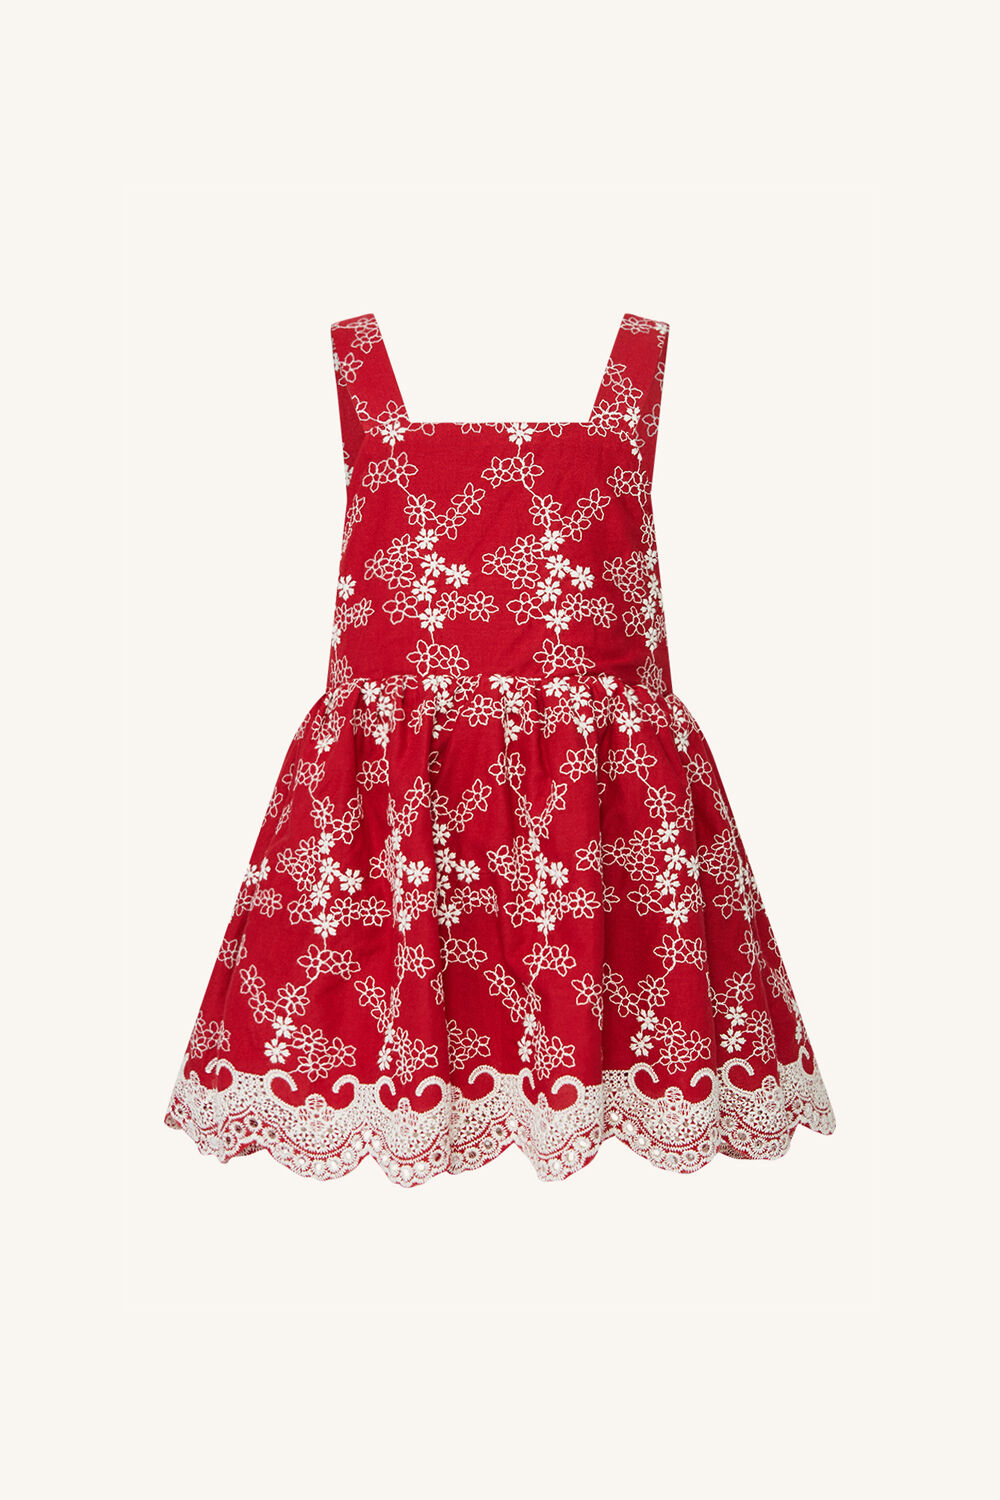 BABY GIRL LILA PINNIE GROW  in colour RIBBON RED